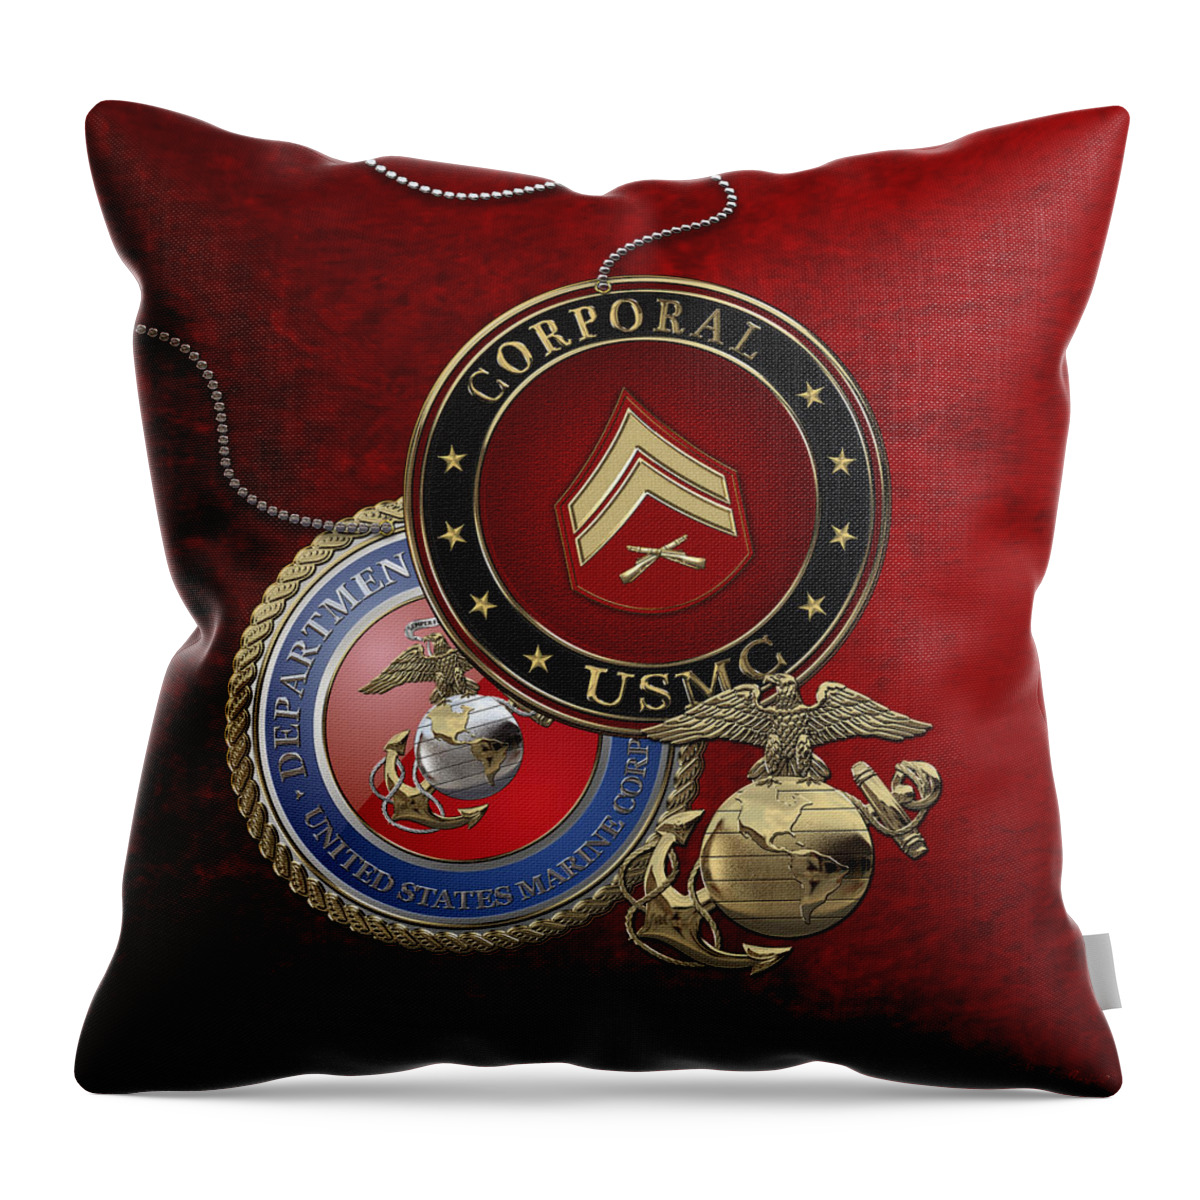 �military Insignia 3d� By Serge Averbukh Throw Pillow featuring the digital art U. S. Marines Corporal Rank Insignia over Red Velvet by Serge Averbukh